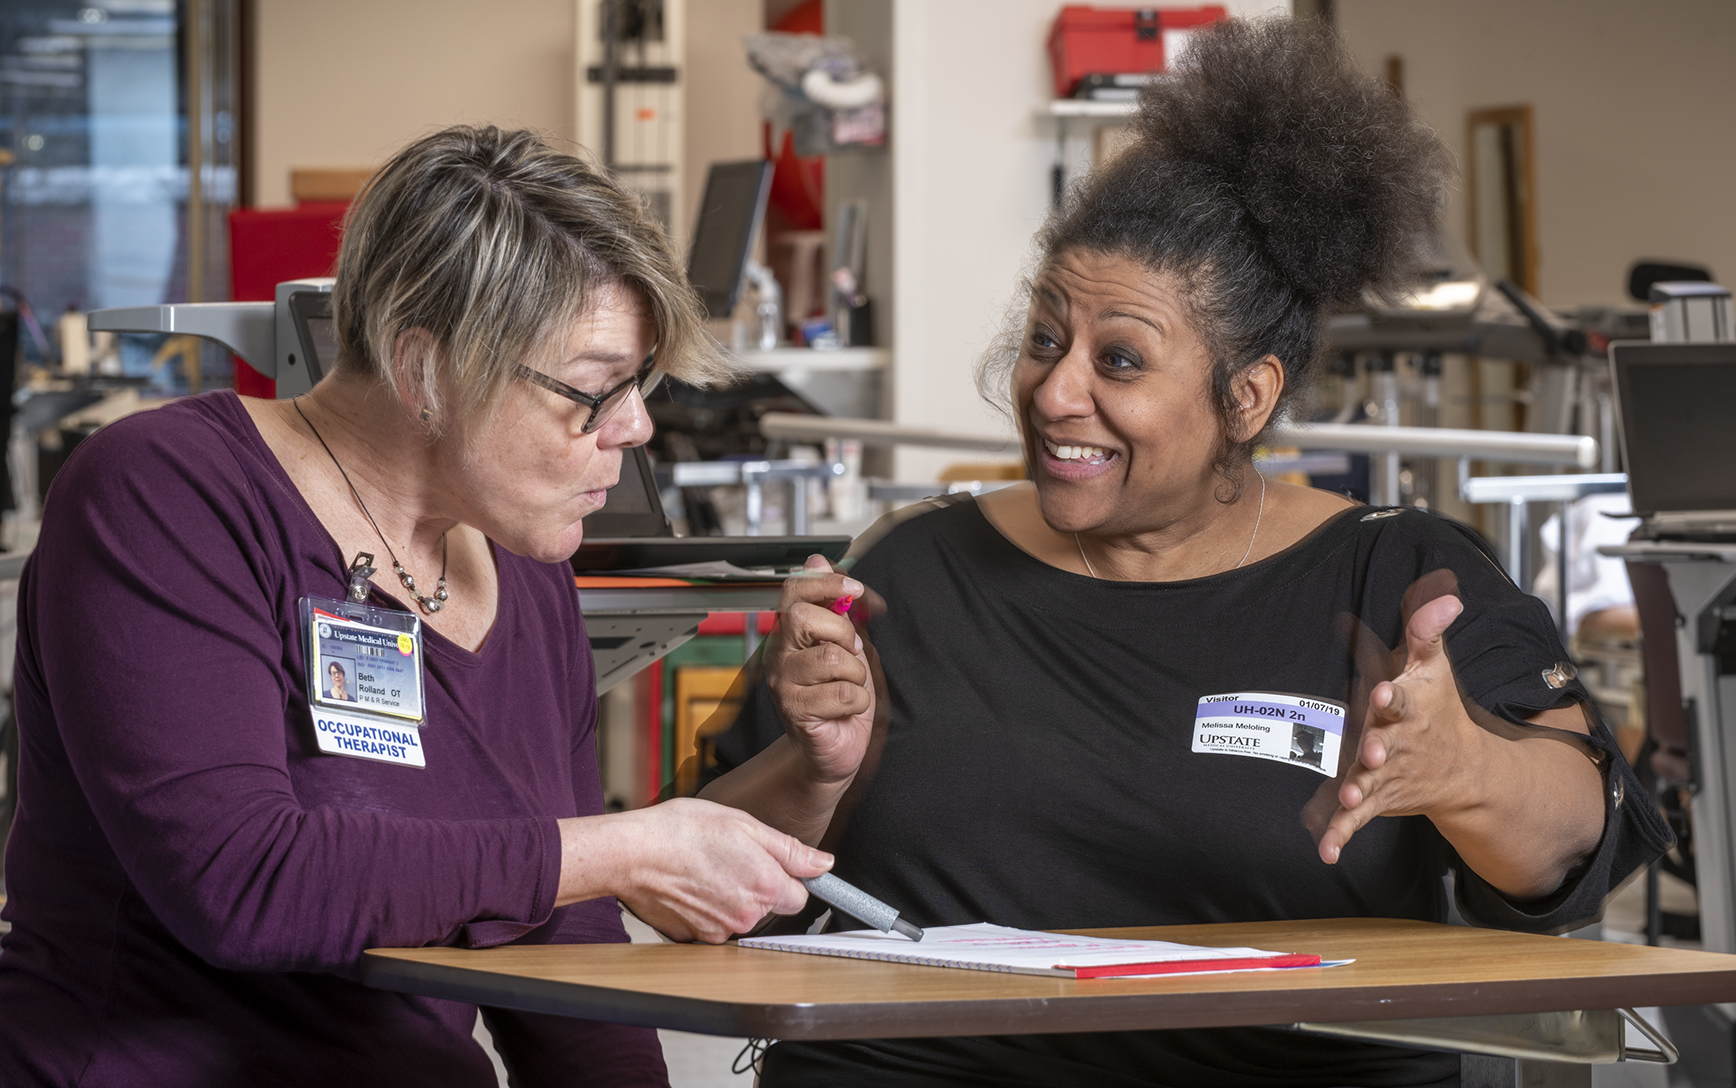 Occupational therapist Beth Rolland, left, with stroke rehabilitation patient Melissa Meloling, during a therapy session. (photo by Robert Mescavage)